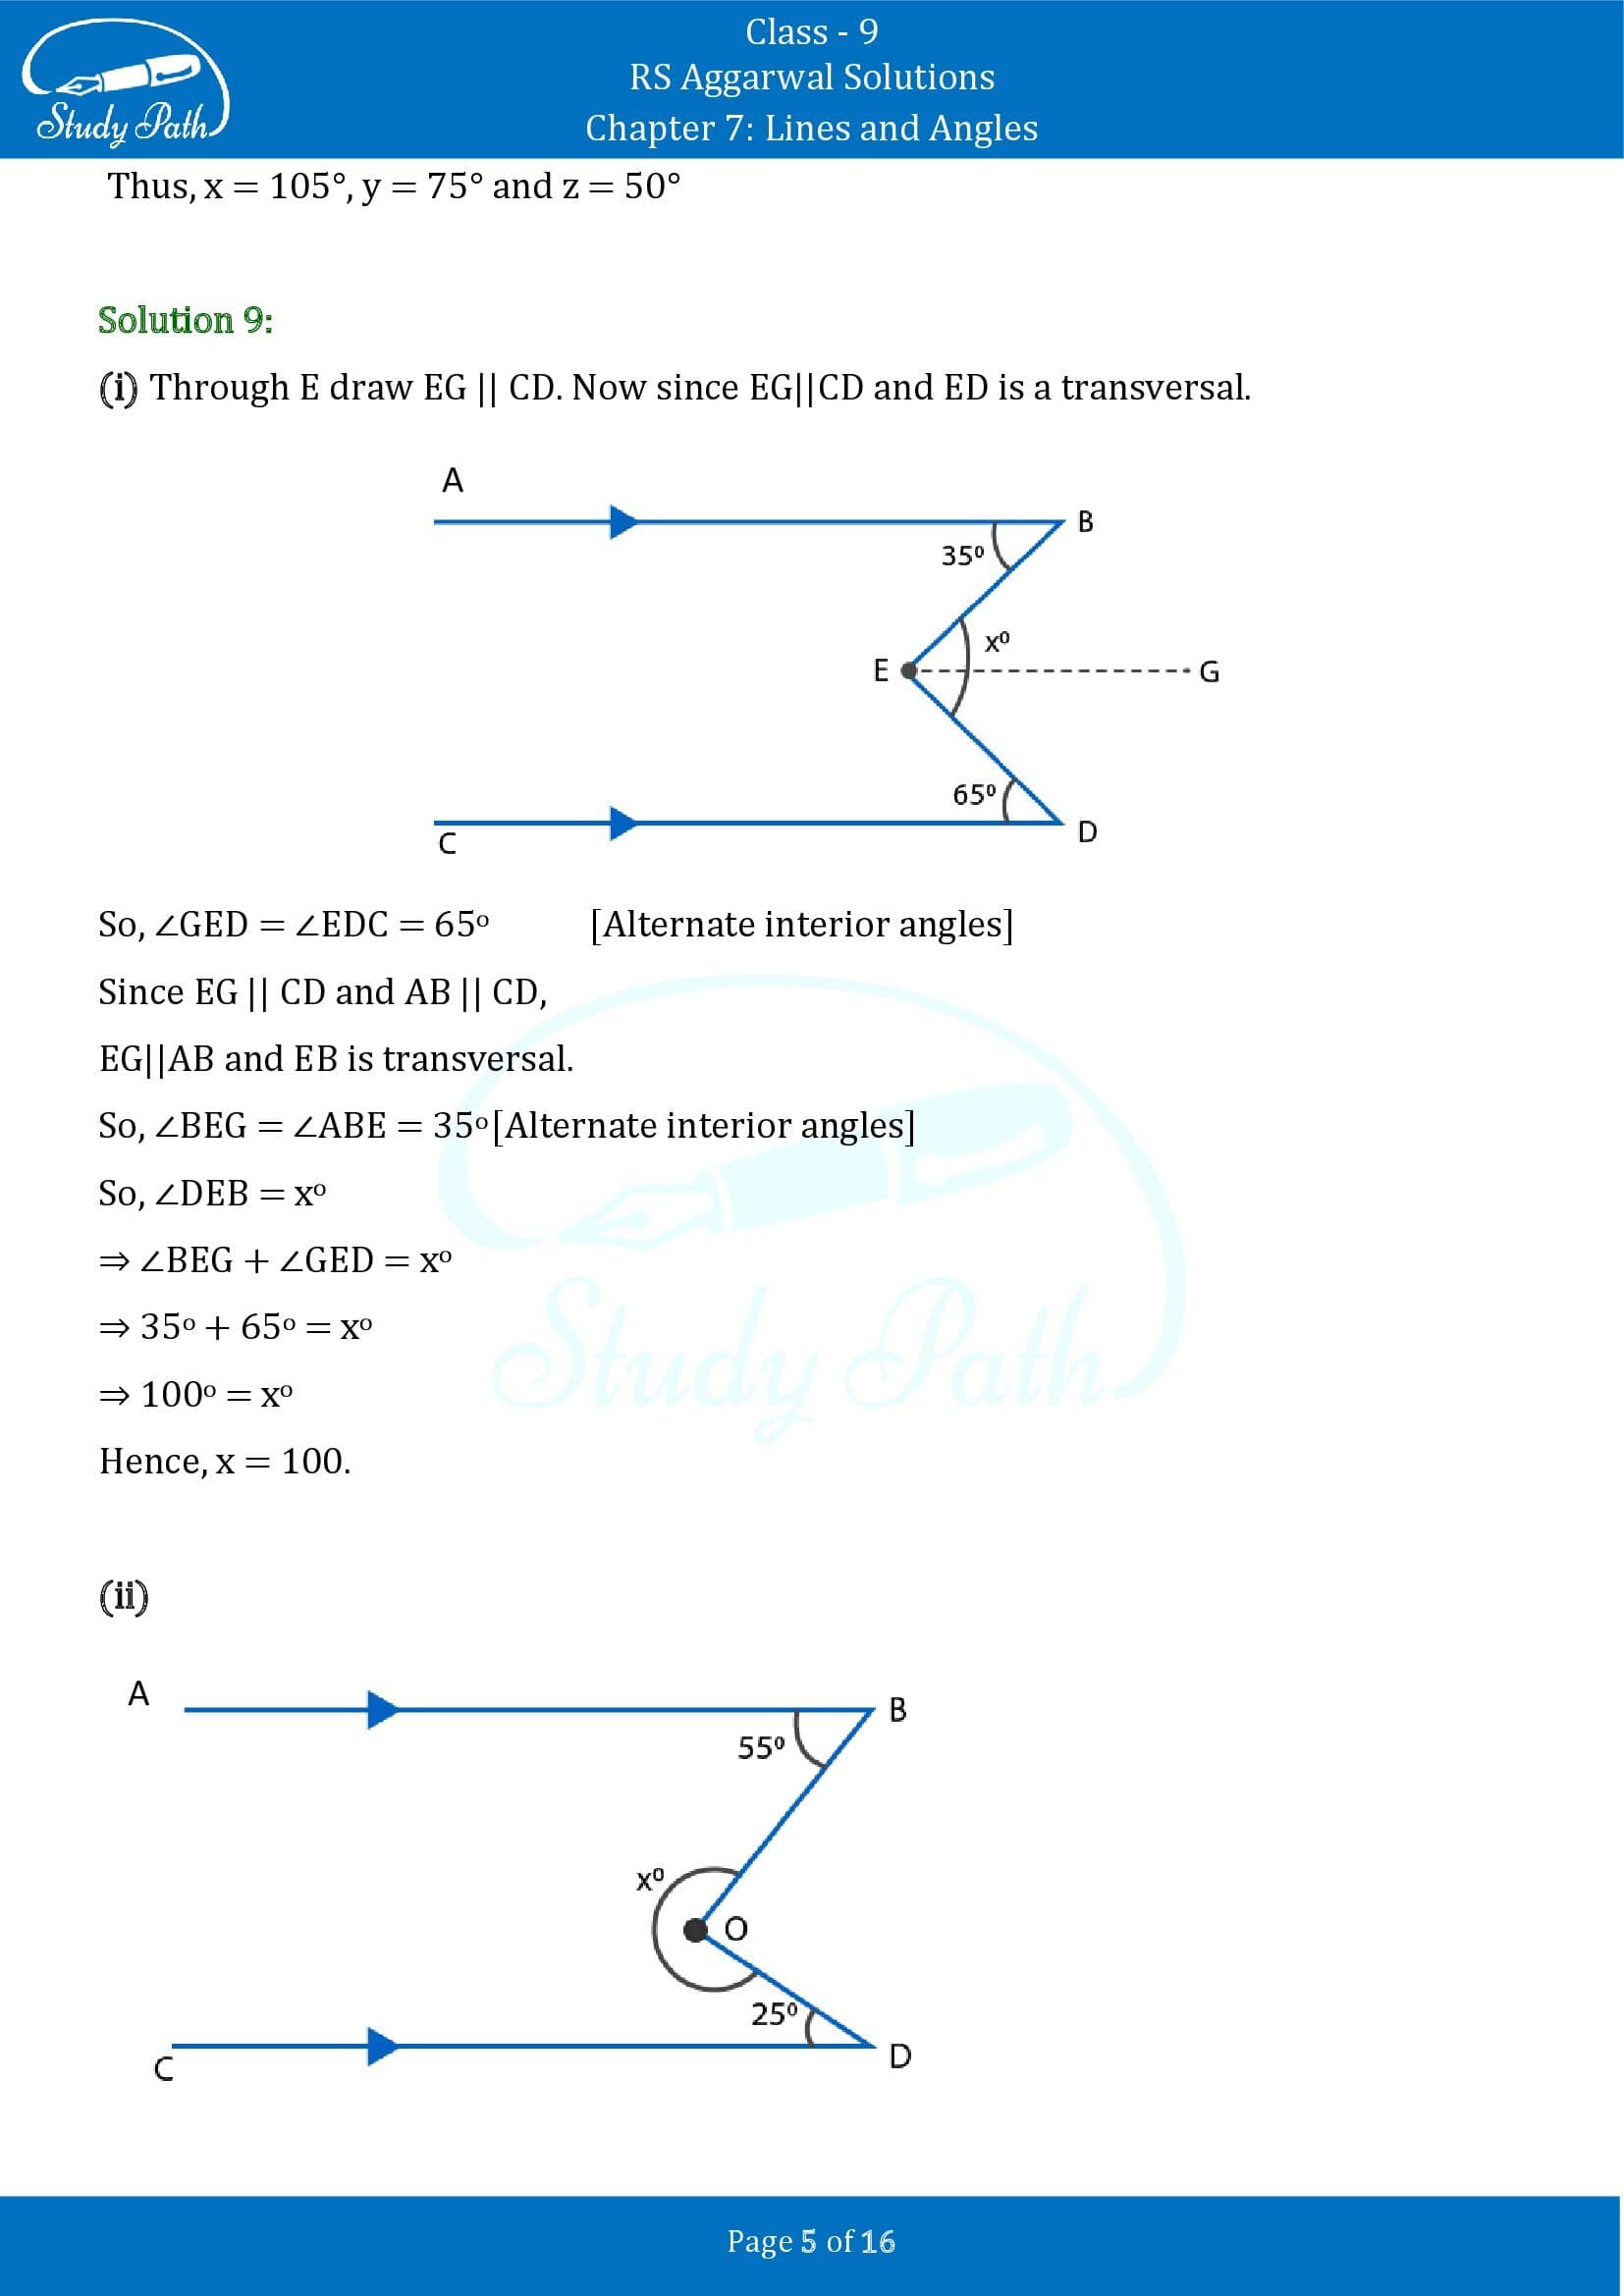 RS Aggarwal Solutions Class 9 Chapter 7 Lines and Angles Exercise 7C 00005